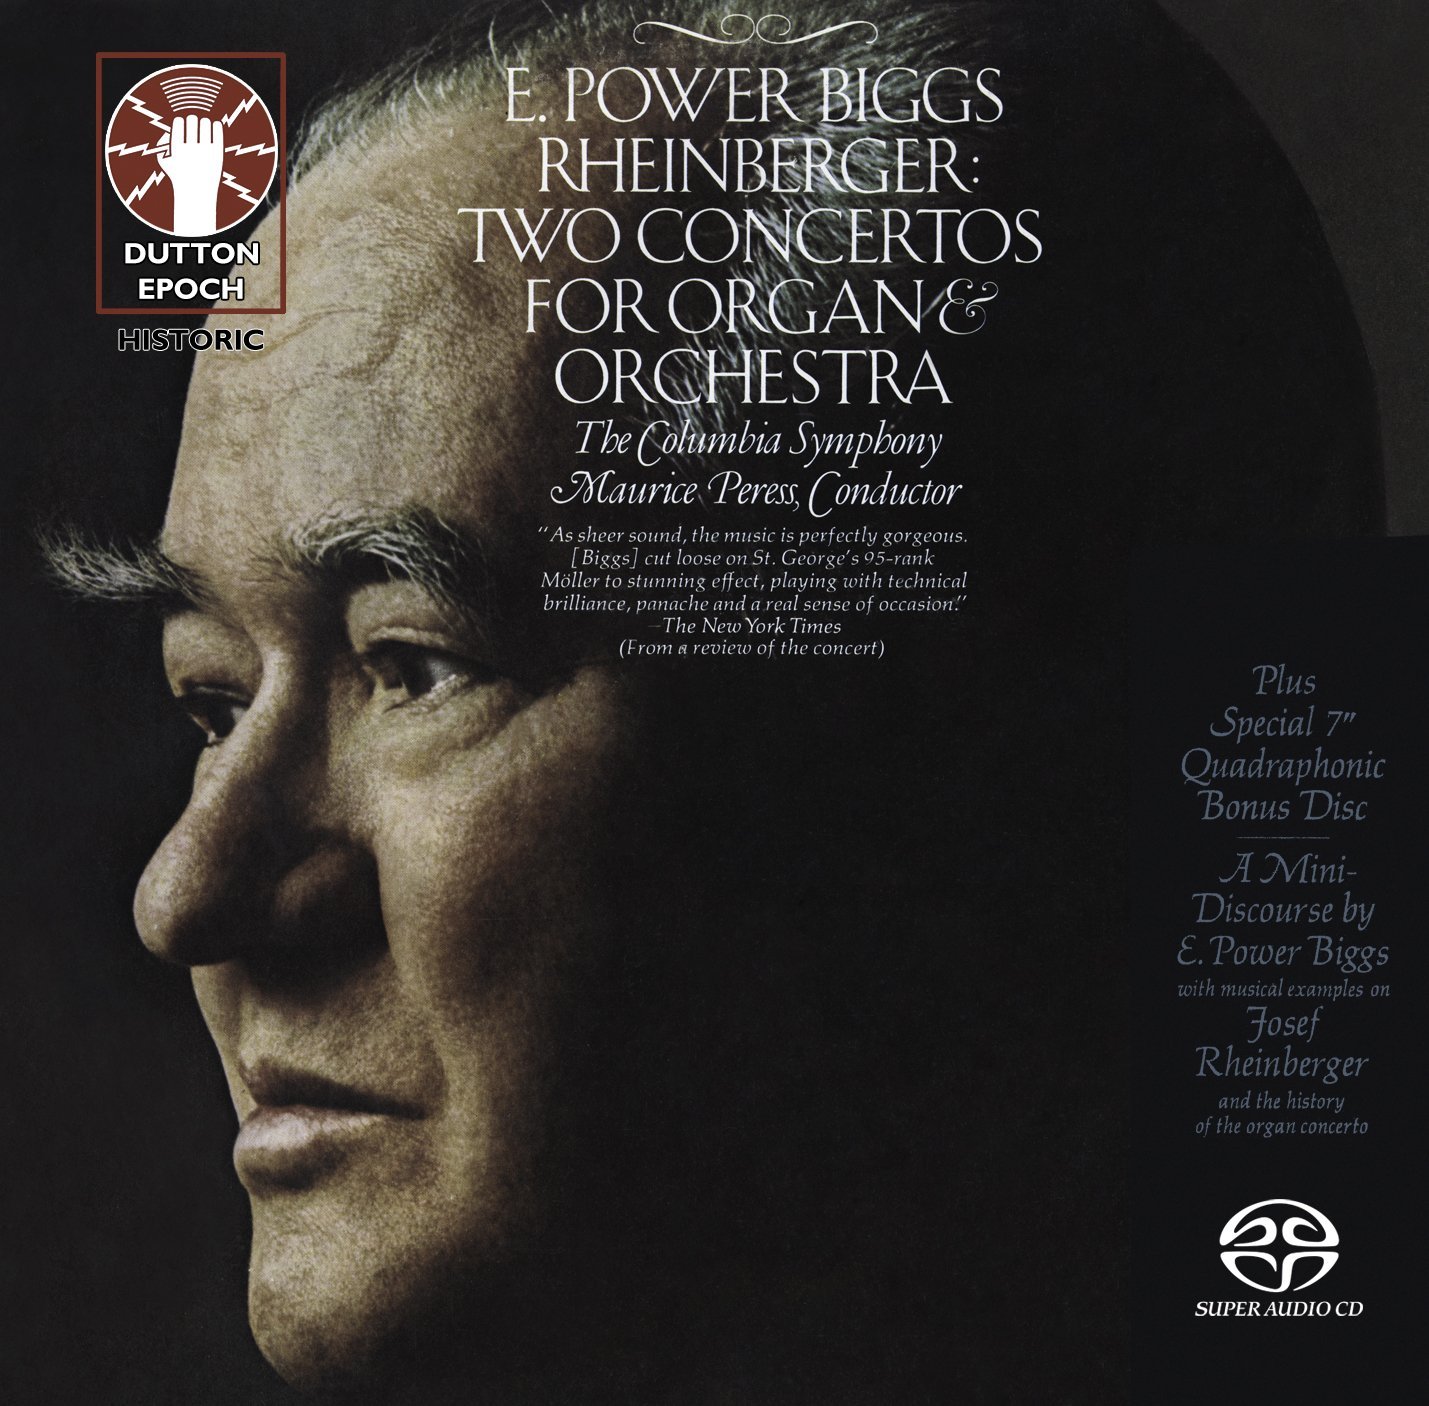 E. Power Biggs – Rheinberger: Two Concertos for Organ & Orchestra (1973) [Reissue 2017] MCH SACD ISO + DSF DSD64 + Hi-Res FLAC